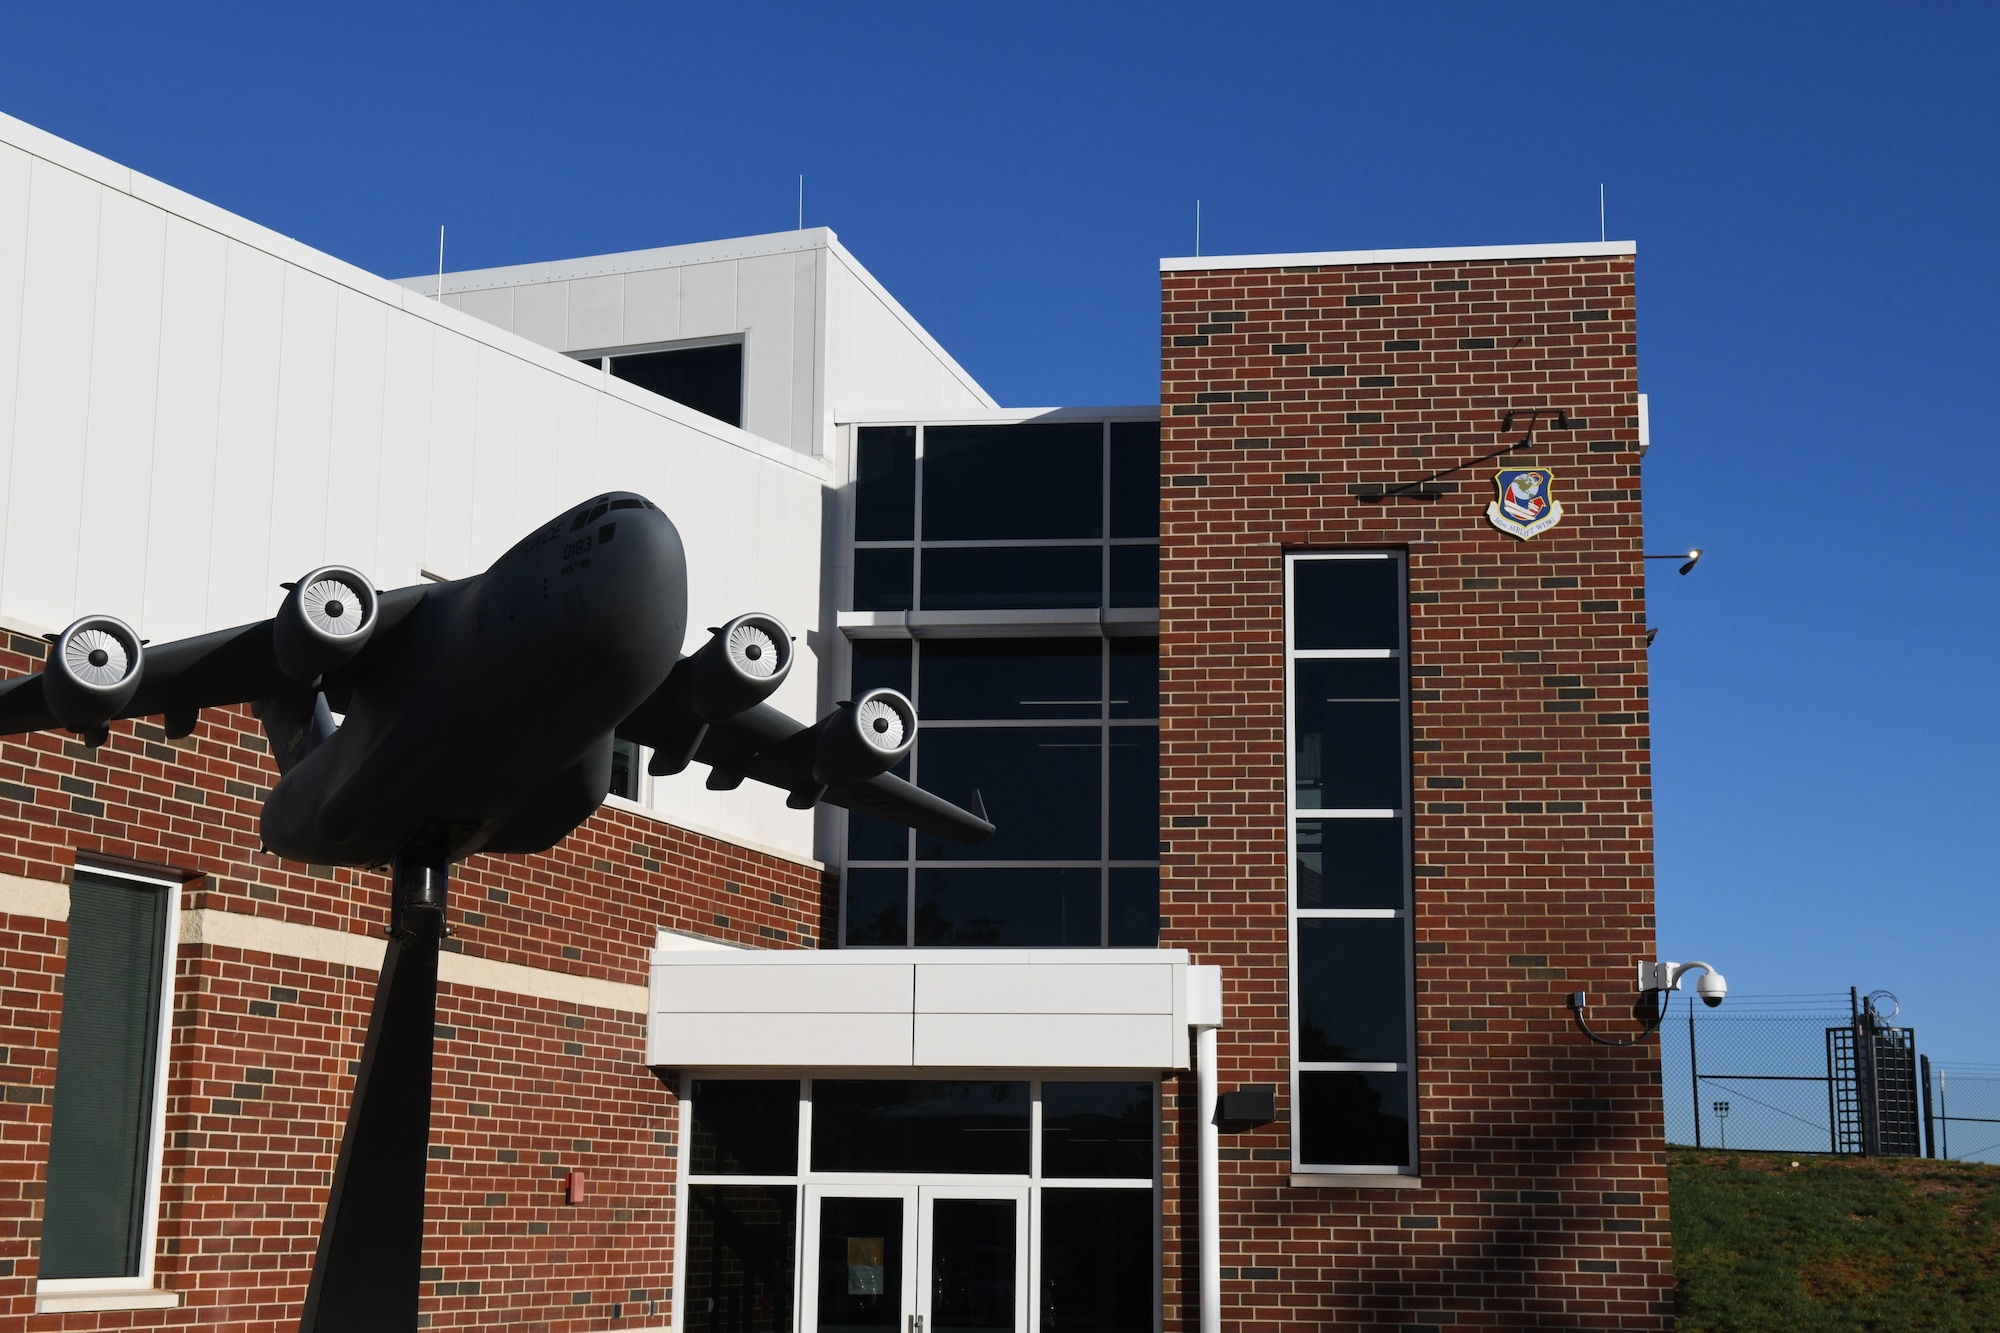 The front entrance of the 145th Operations Group building, constructed as part of the C-17 conversion for the 145th Airlift Wing, it was the first building to be completed during the conversion process, at the  North Carolina Air National Guard Base, Charlotte Douglas International Airport, October 14, 2020. The 145th Airlift Wing began converting from C-130 Hercules to the C-17 in October of 2017 and officially exited conversion in October 2020.